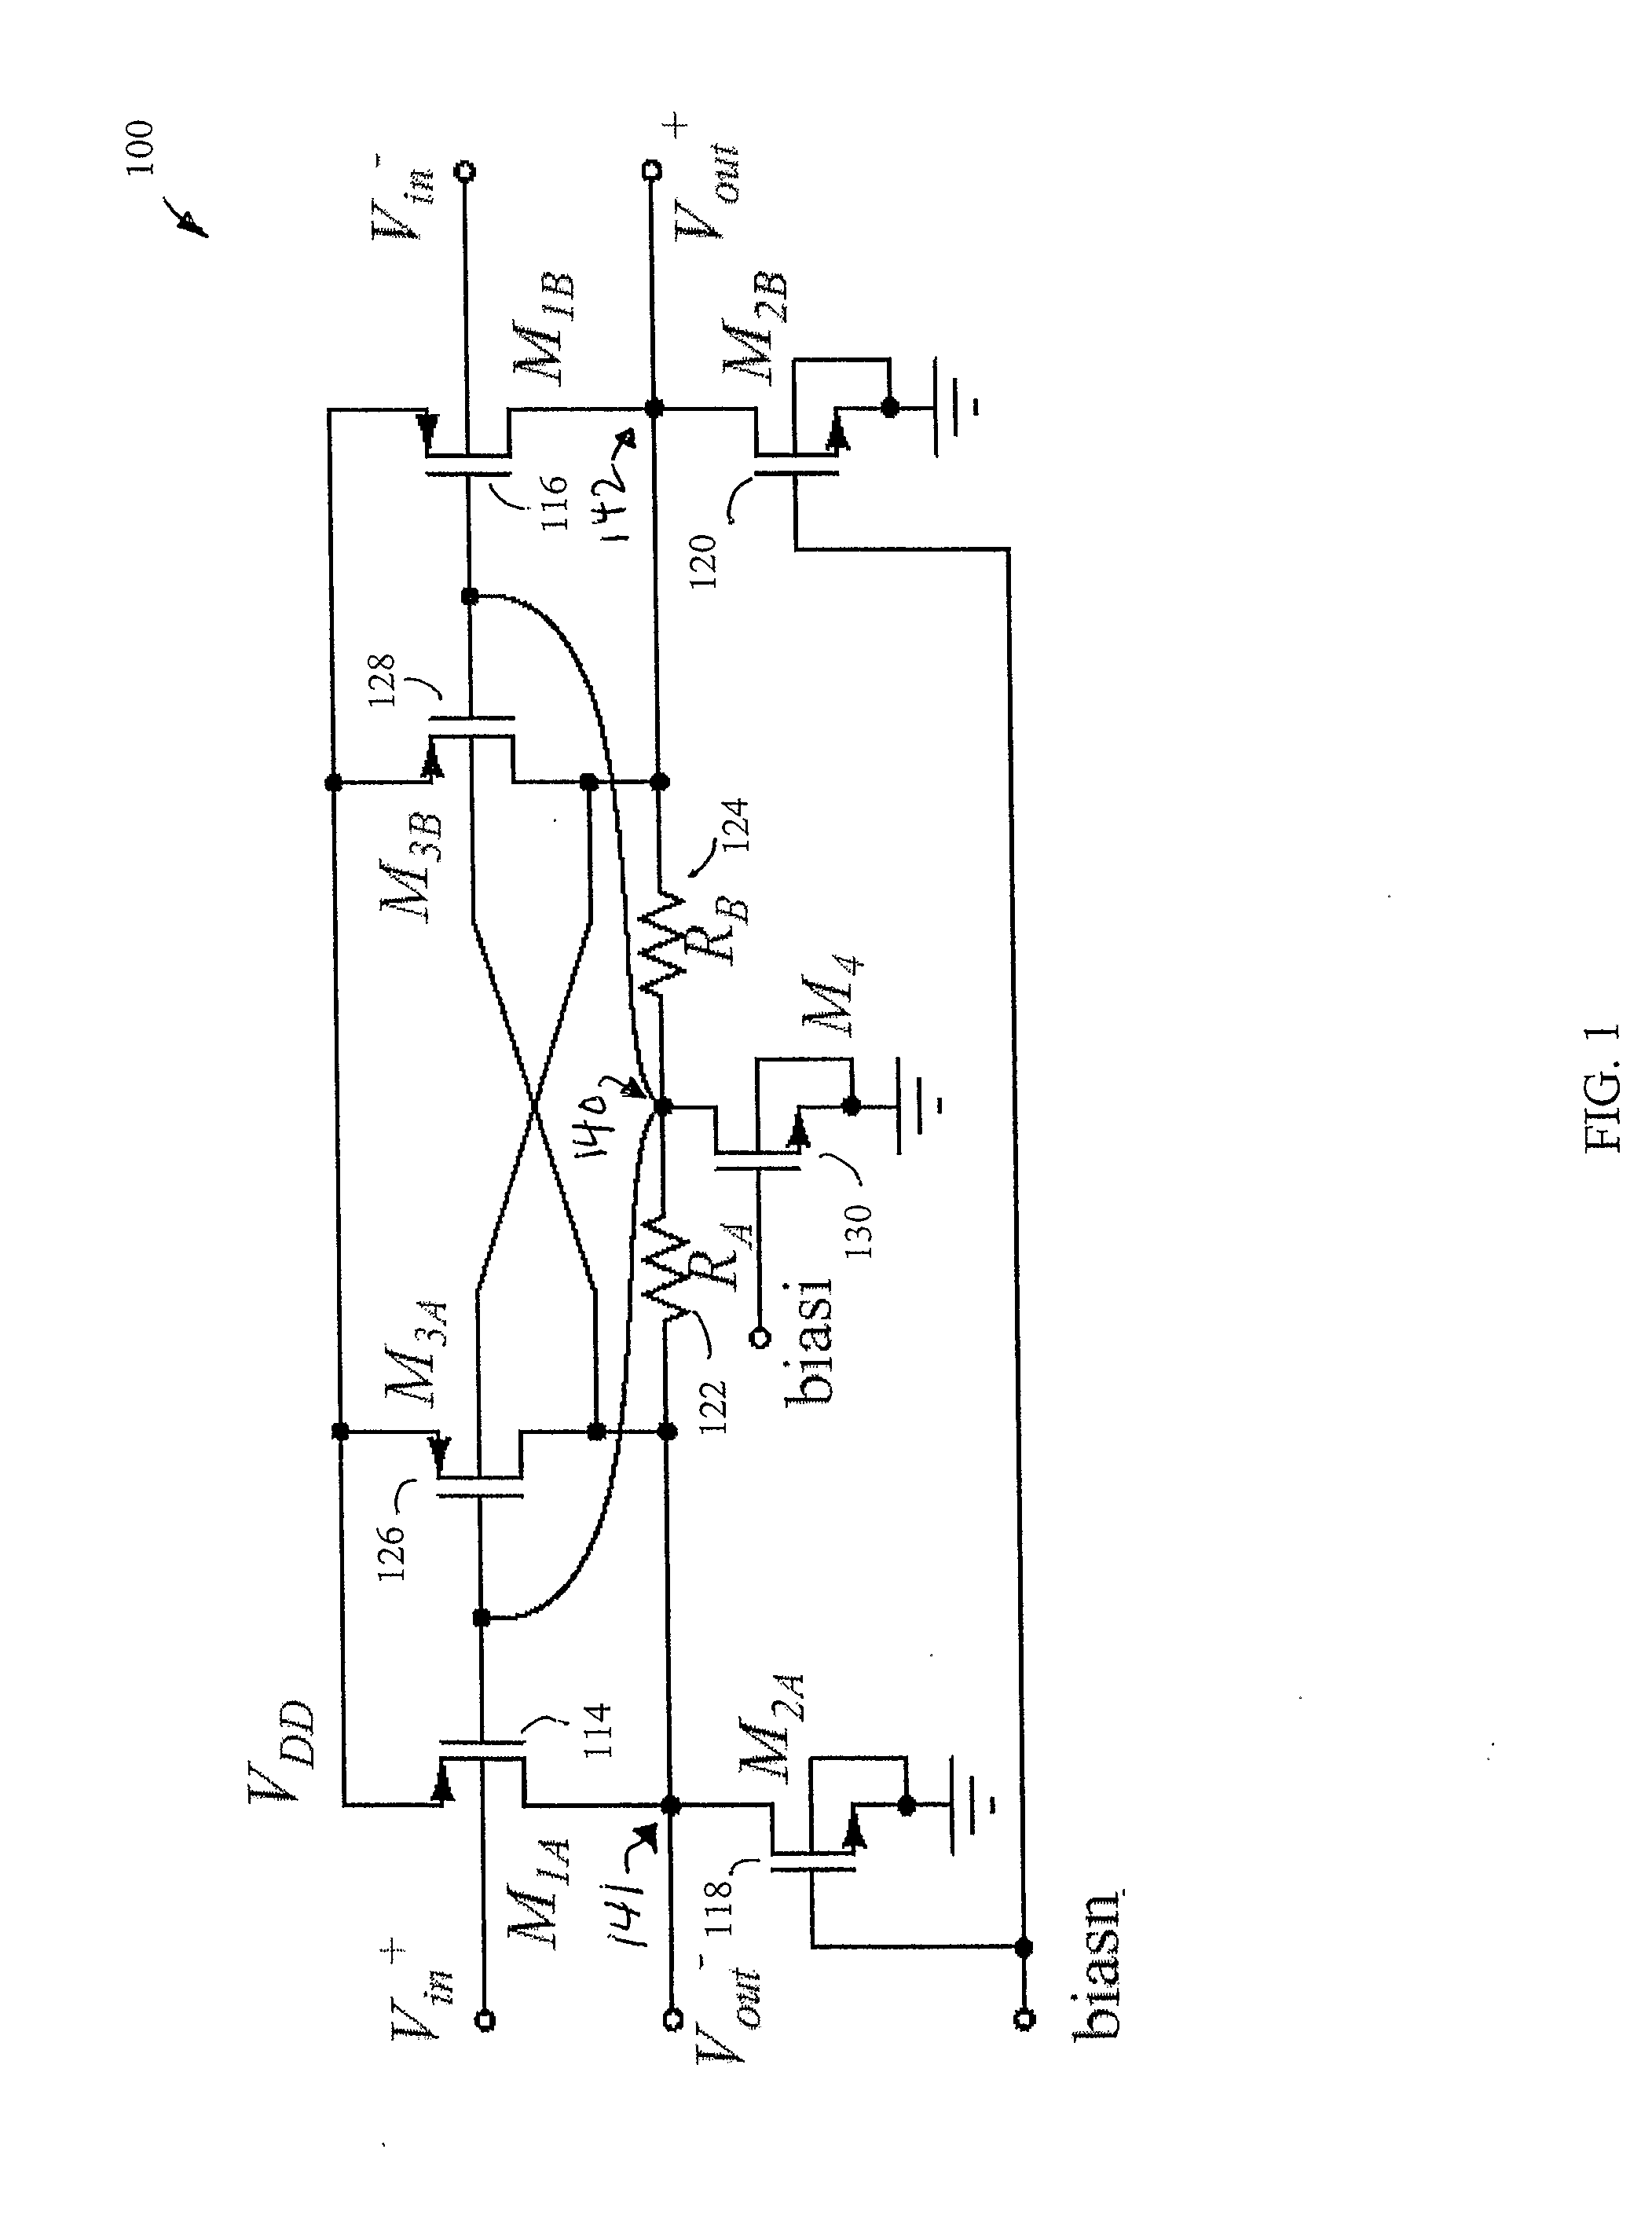 Low Voltage Operational Transconductance Amplifier Circuits